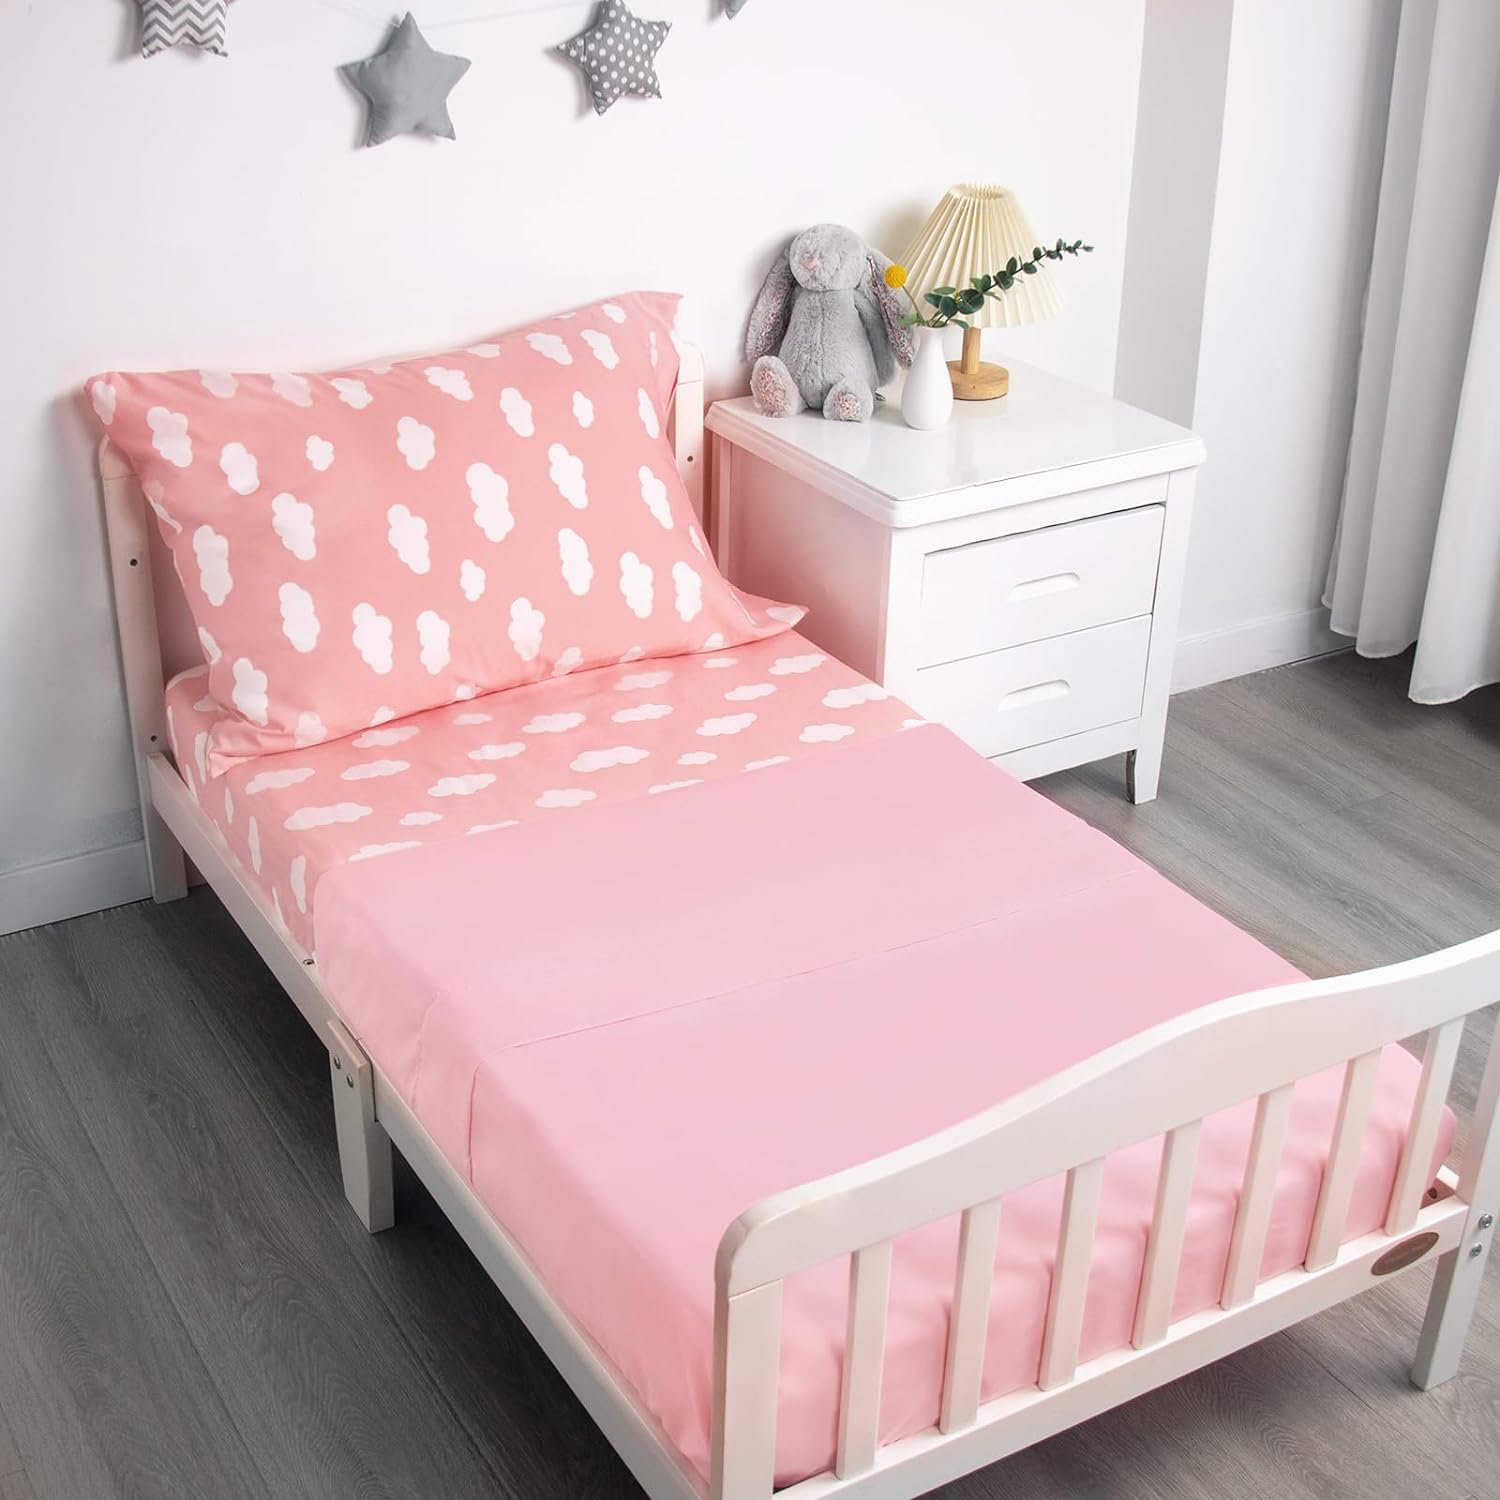 Toddler Bedding Set - 3 Pieces, Includes a Crib Fitted Sheet, Flat Sheet and Envelope Pillowcase, Soft and Breathable, Pink Cloud - Biloban Online Store